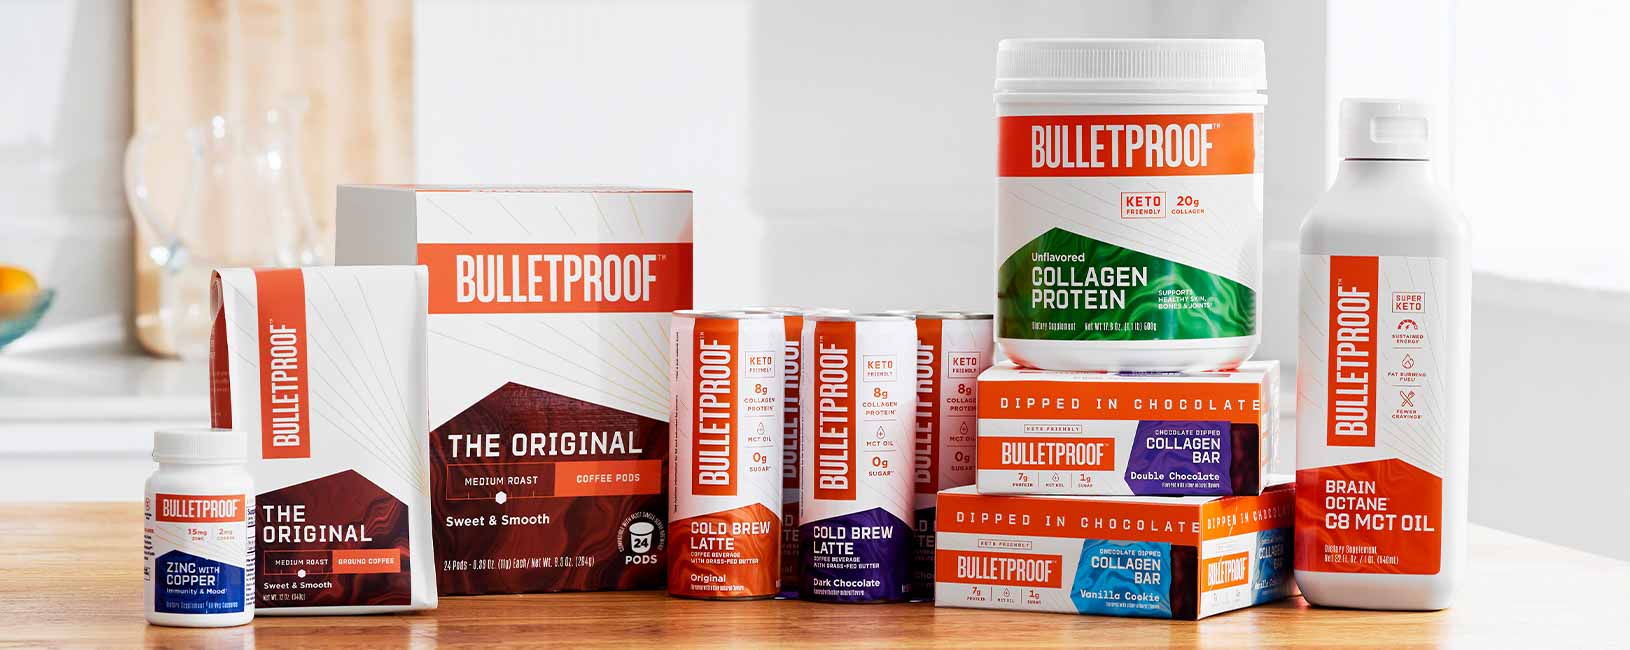 Bulletproof products showcased on tabletop